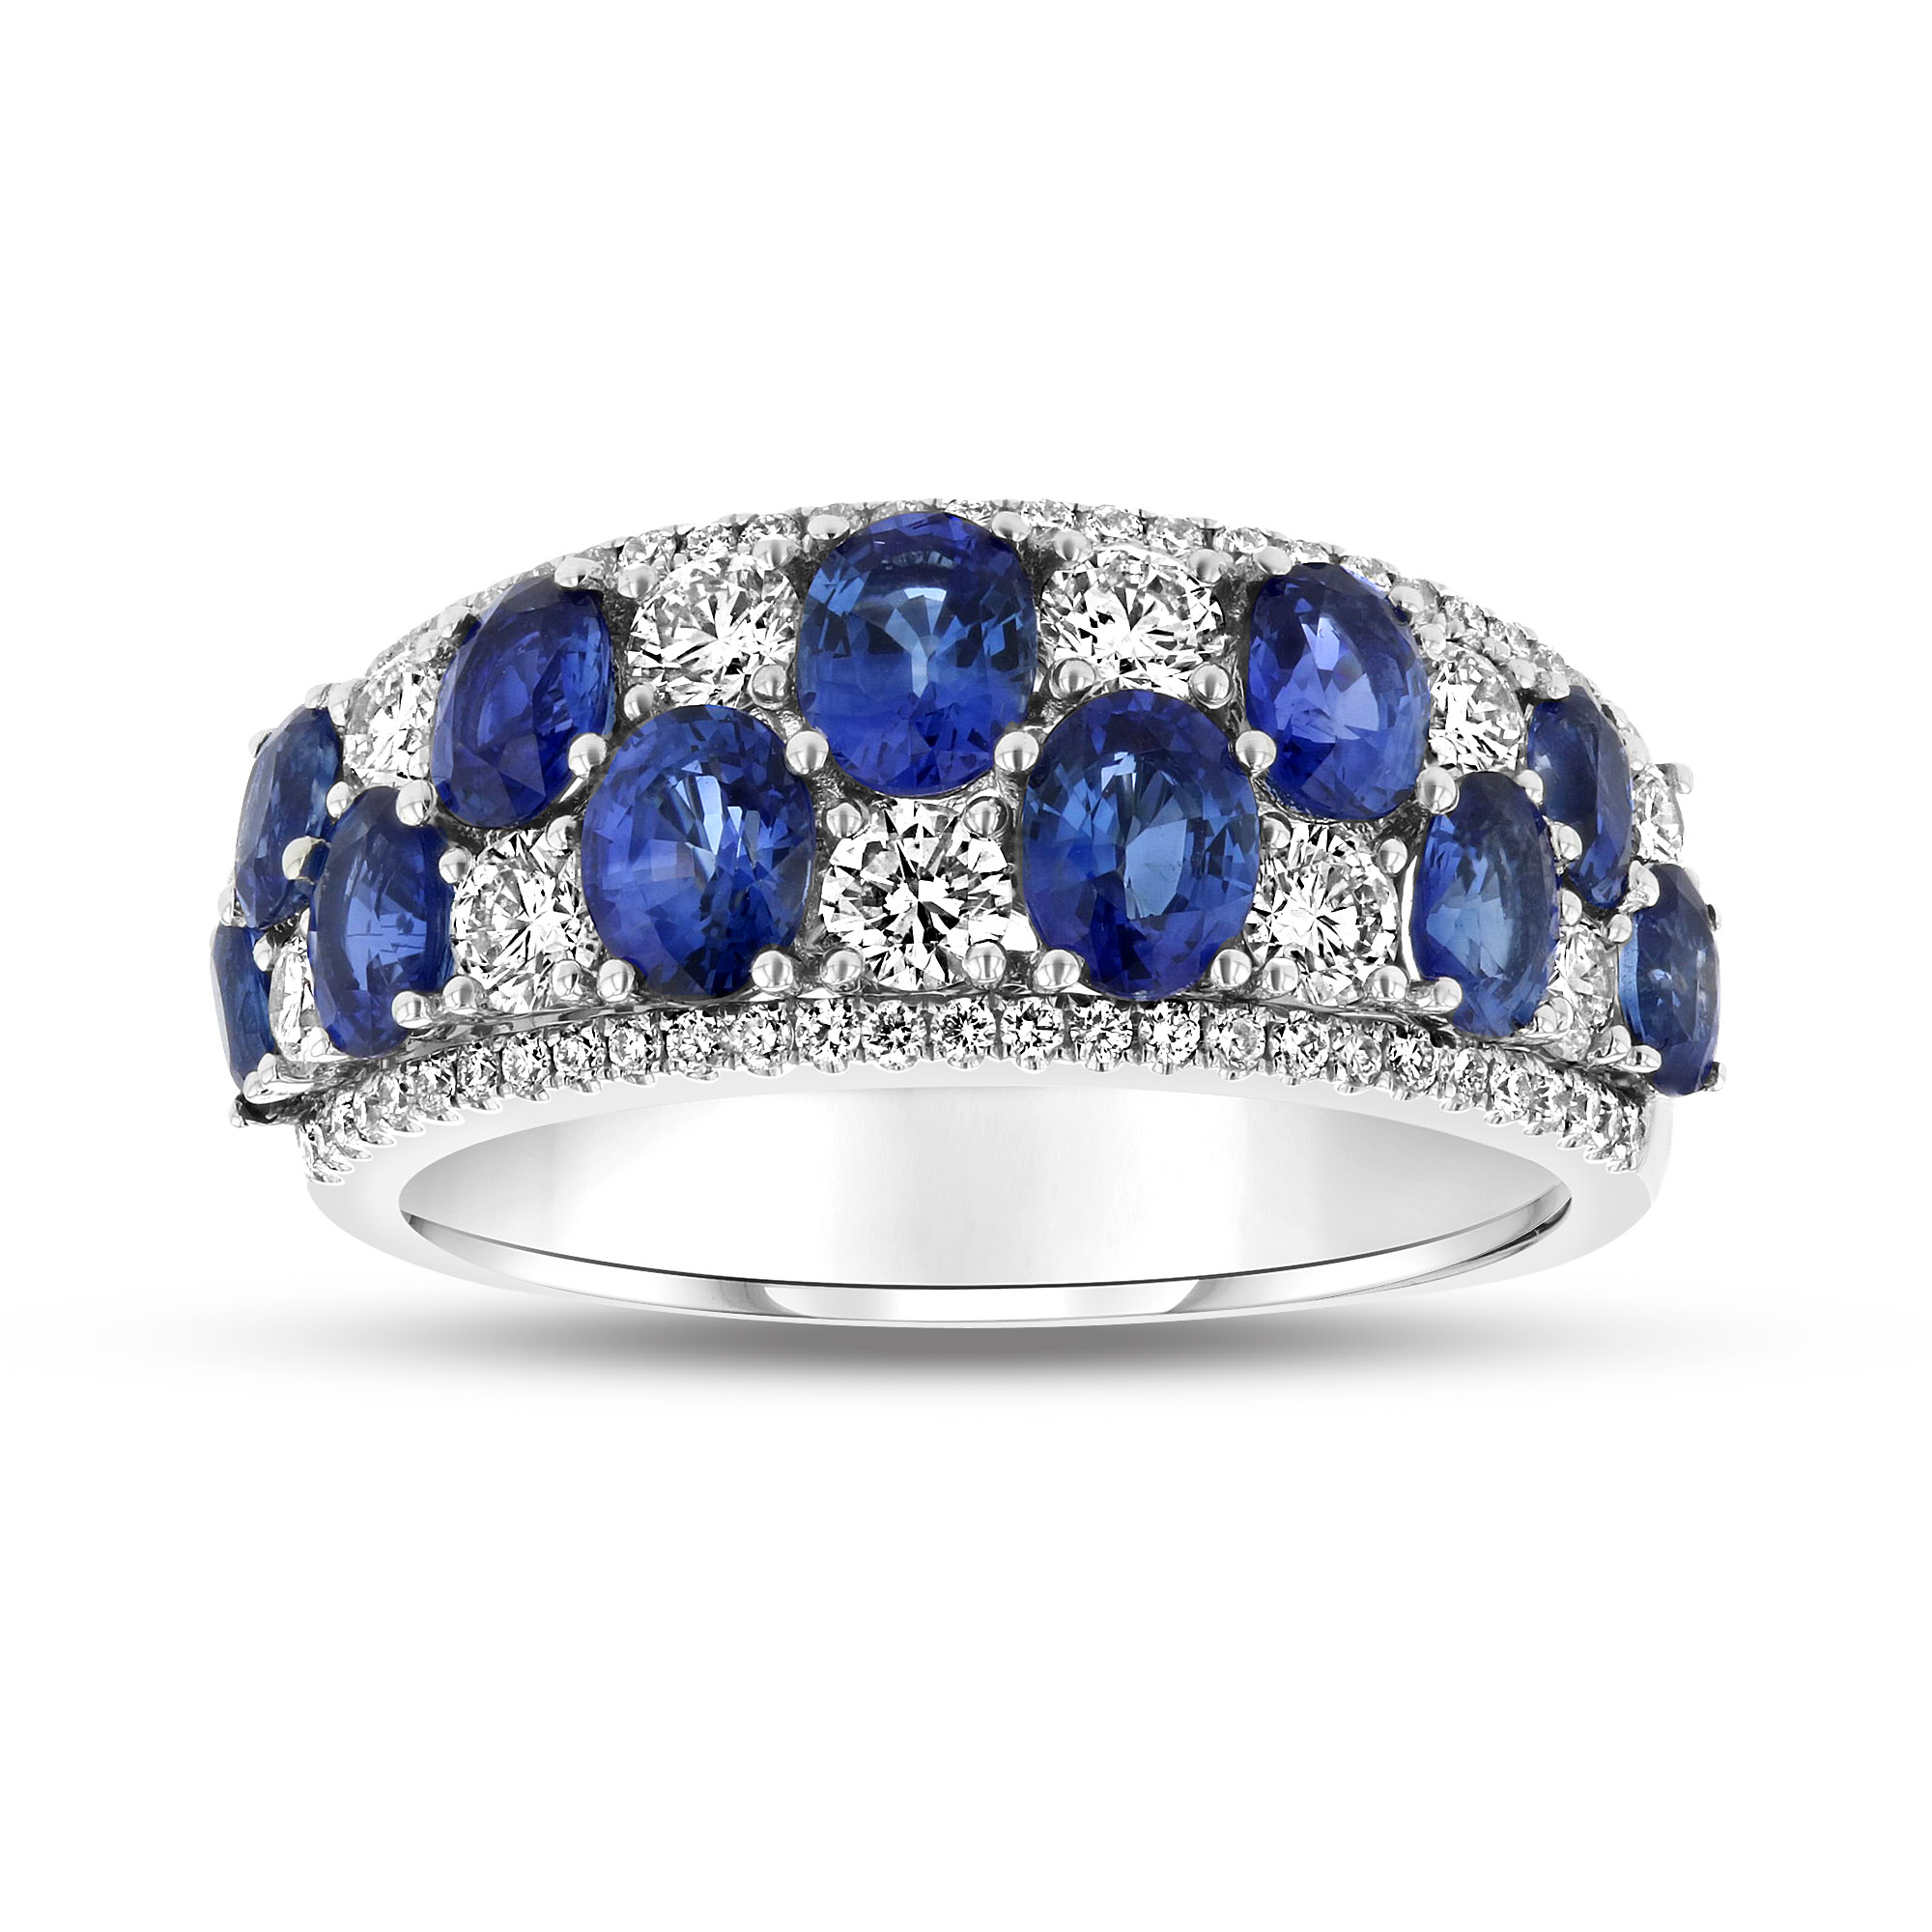 View 3.2ctw Diamond and Sapphire Ring in 18k White Gold